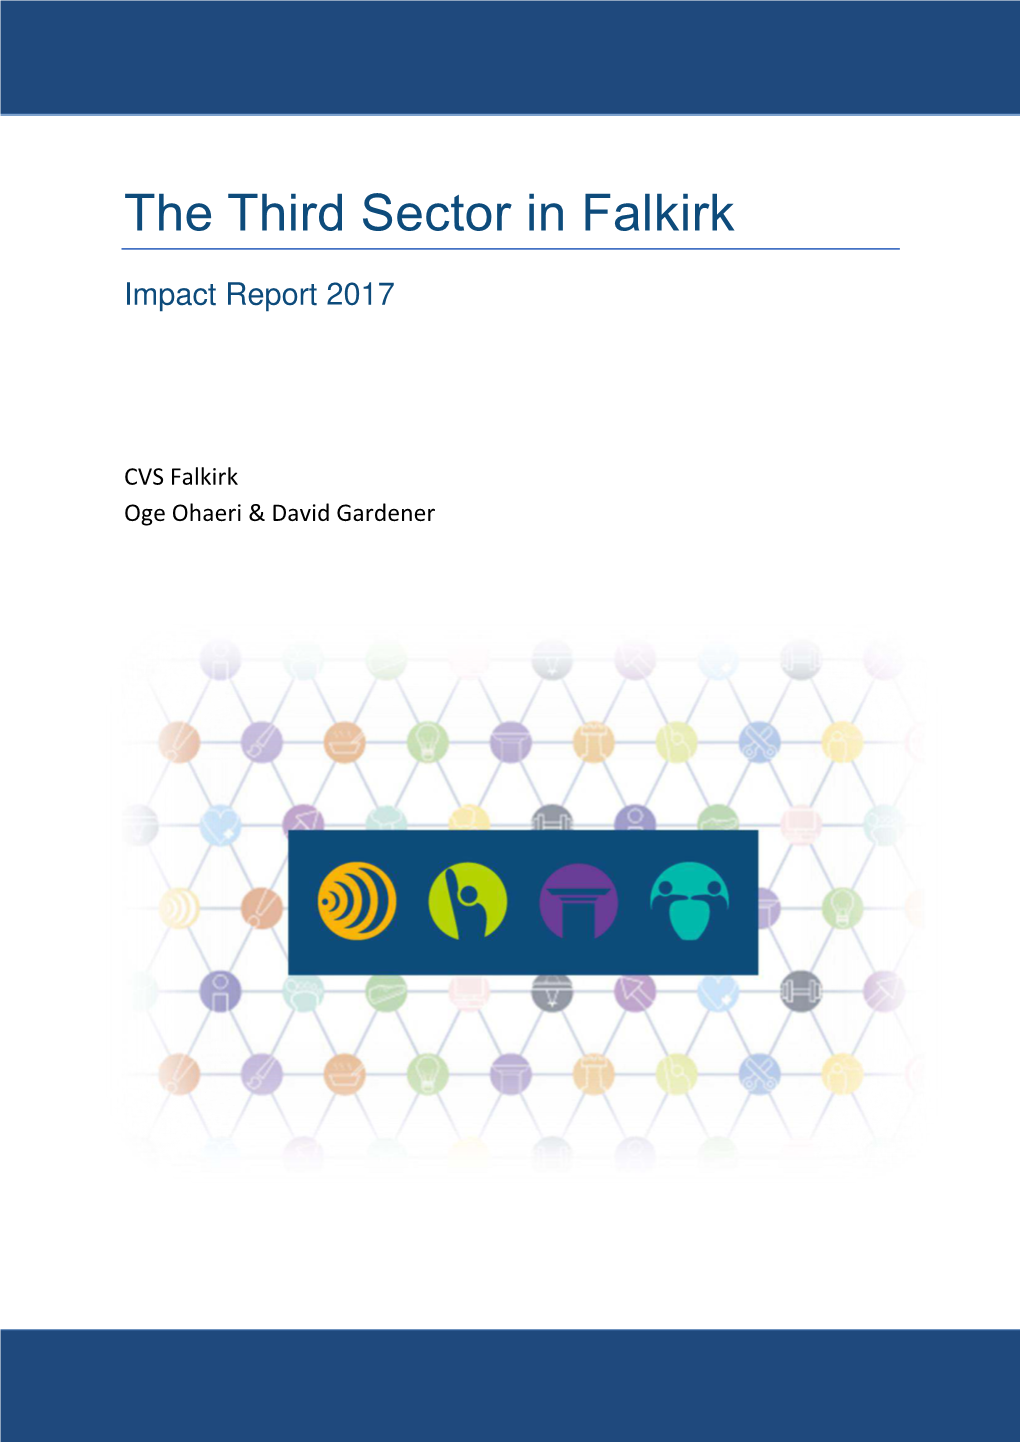 The Third Sector in Falkirk